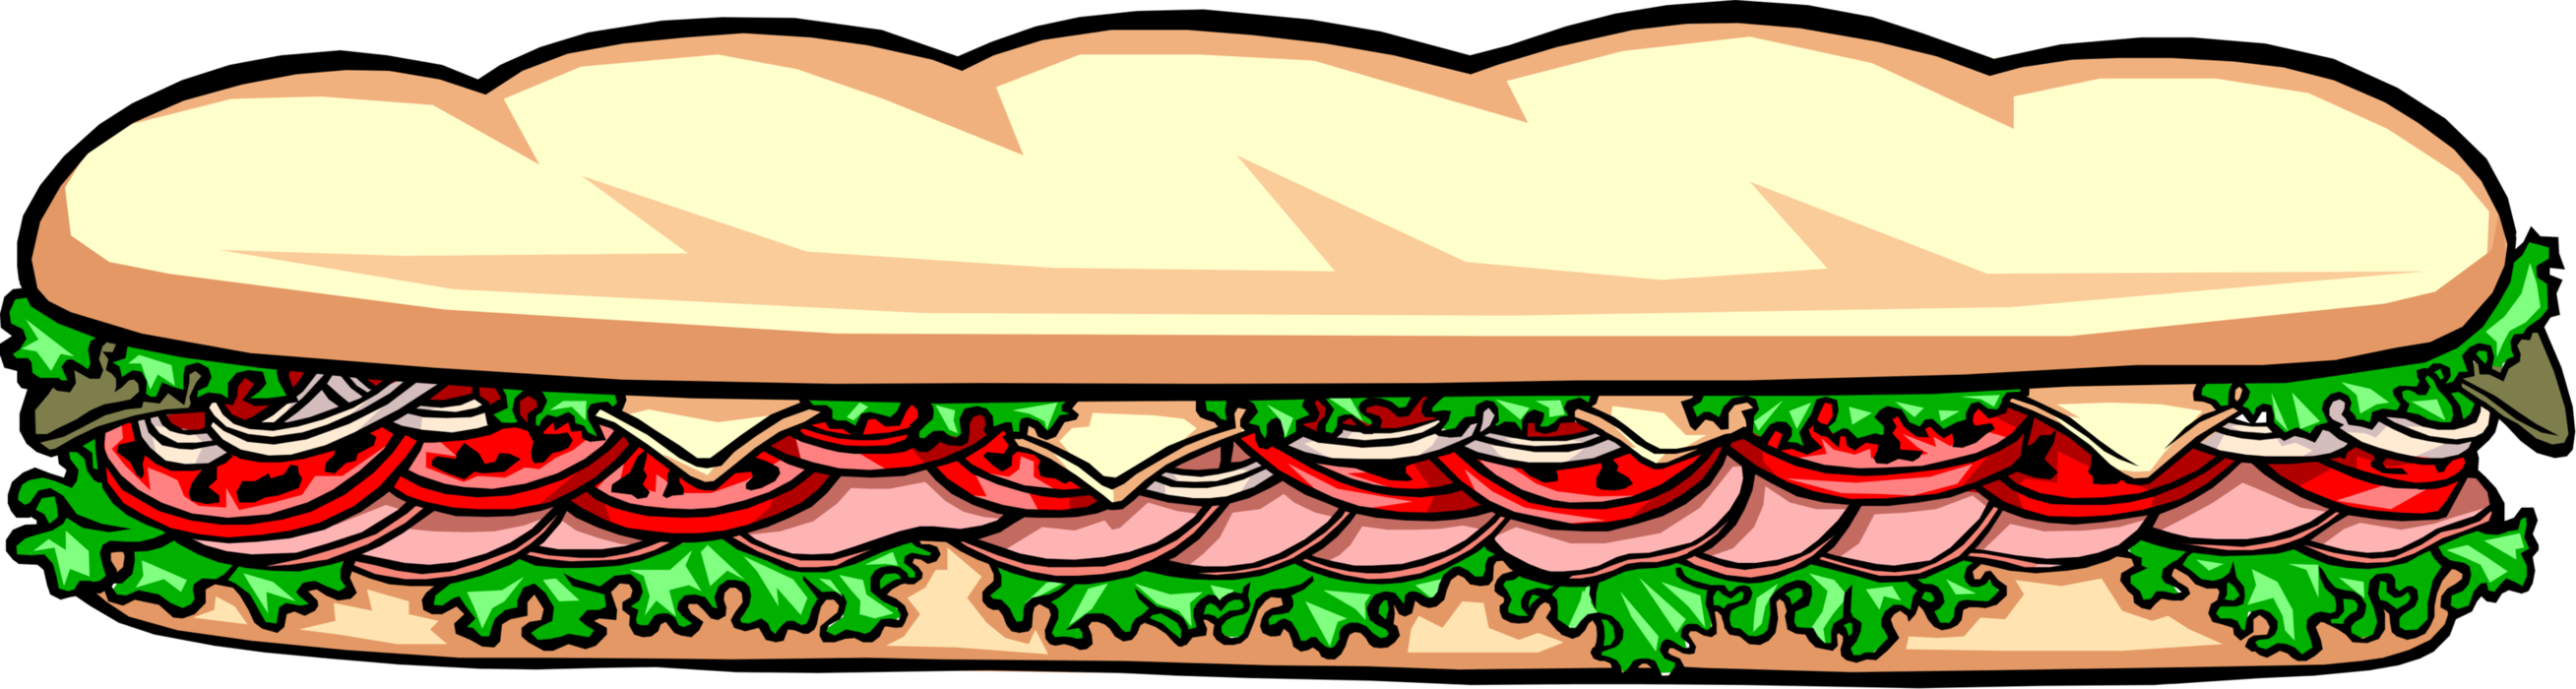 Vector Illustration of Sea Submarine or Hoagie Hero Sandwich with Lettuce, Tomato and Fresh Cold Cut Meats